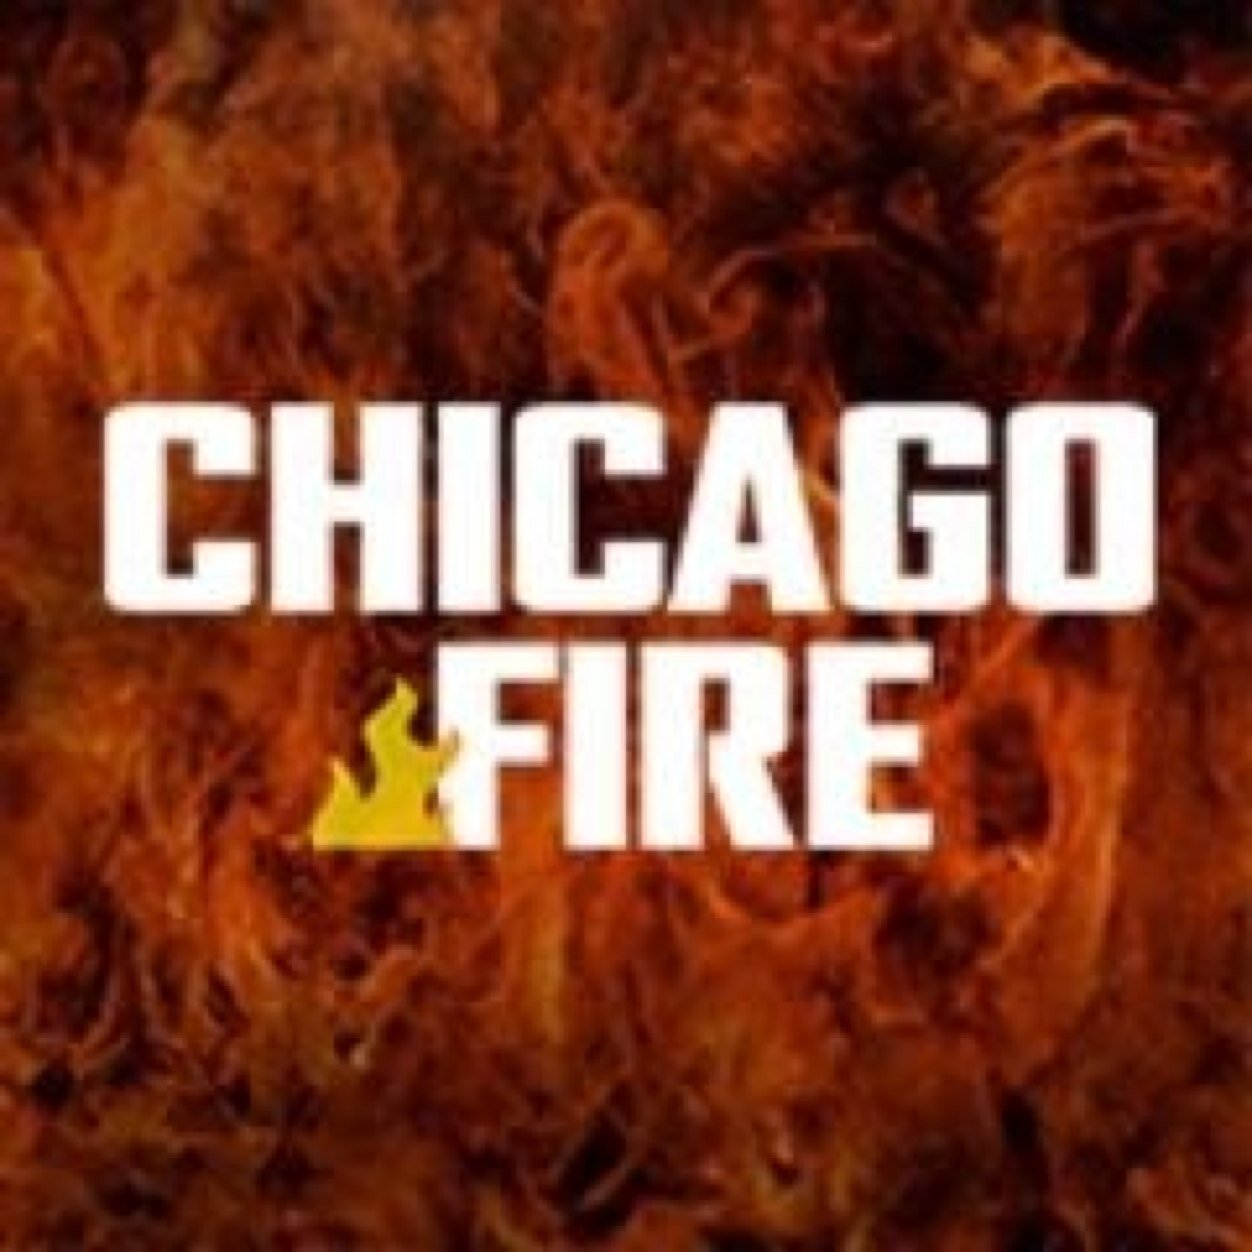 Coming at you with Chicago Fire updates. Every tuesday at 10/9c. The new show Chicago PD every wednesday night at 10/9c!